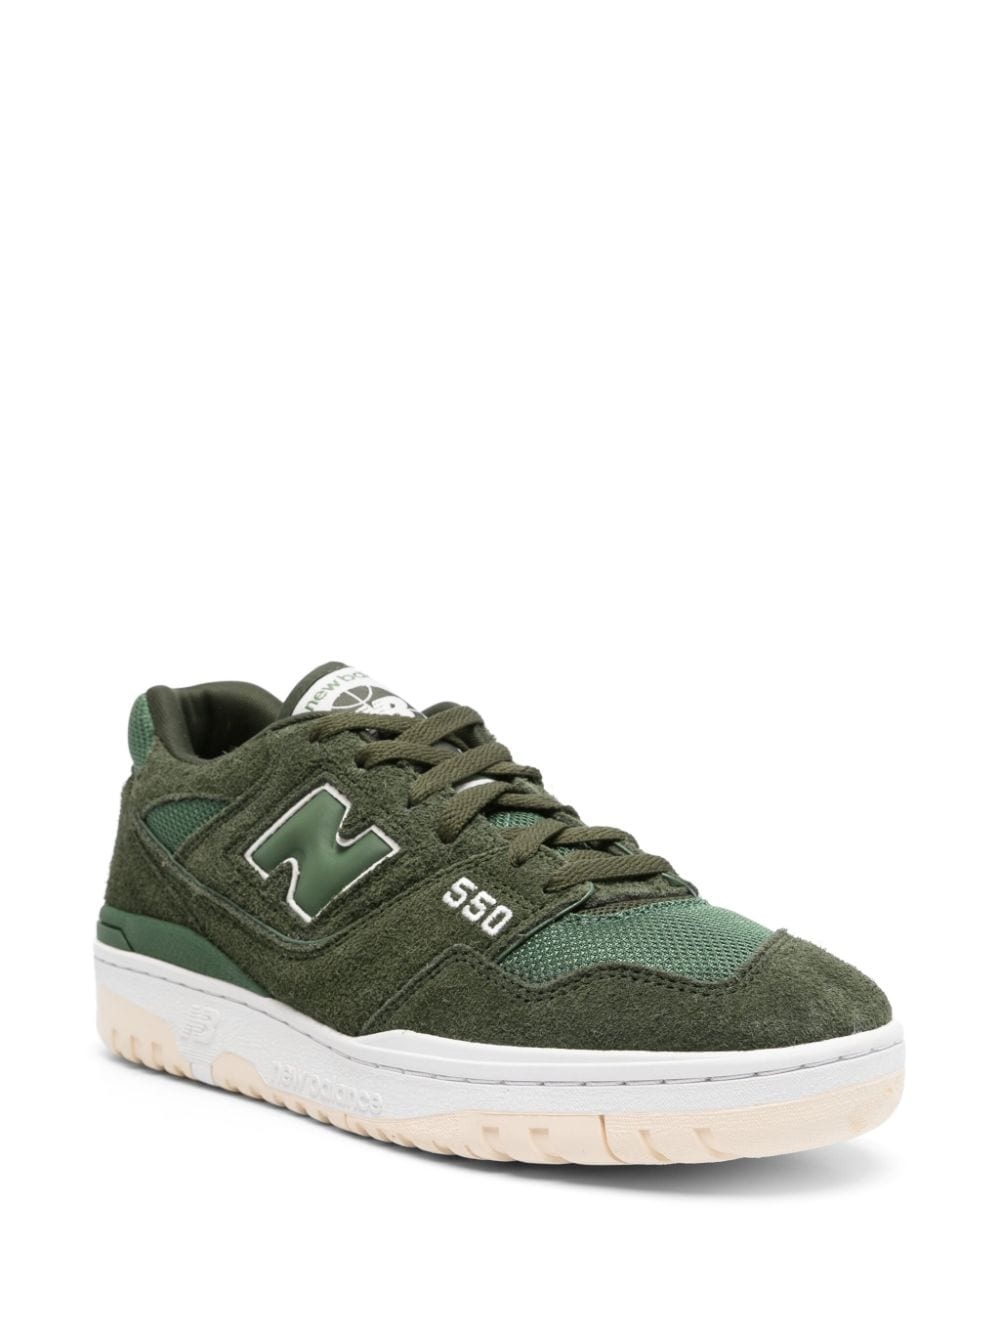 New Balance 550 suede sneakers | REVERSIBLE